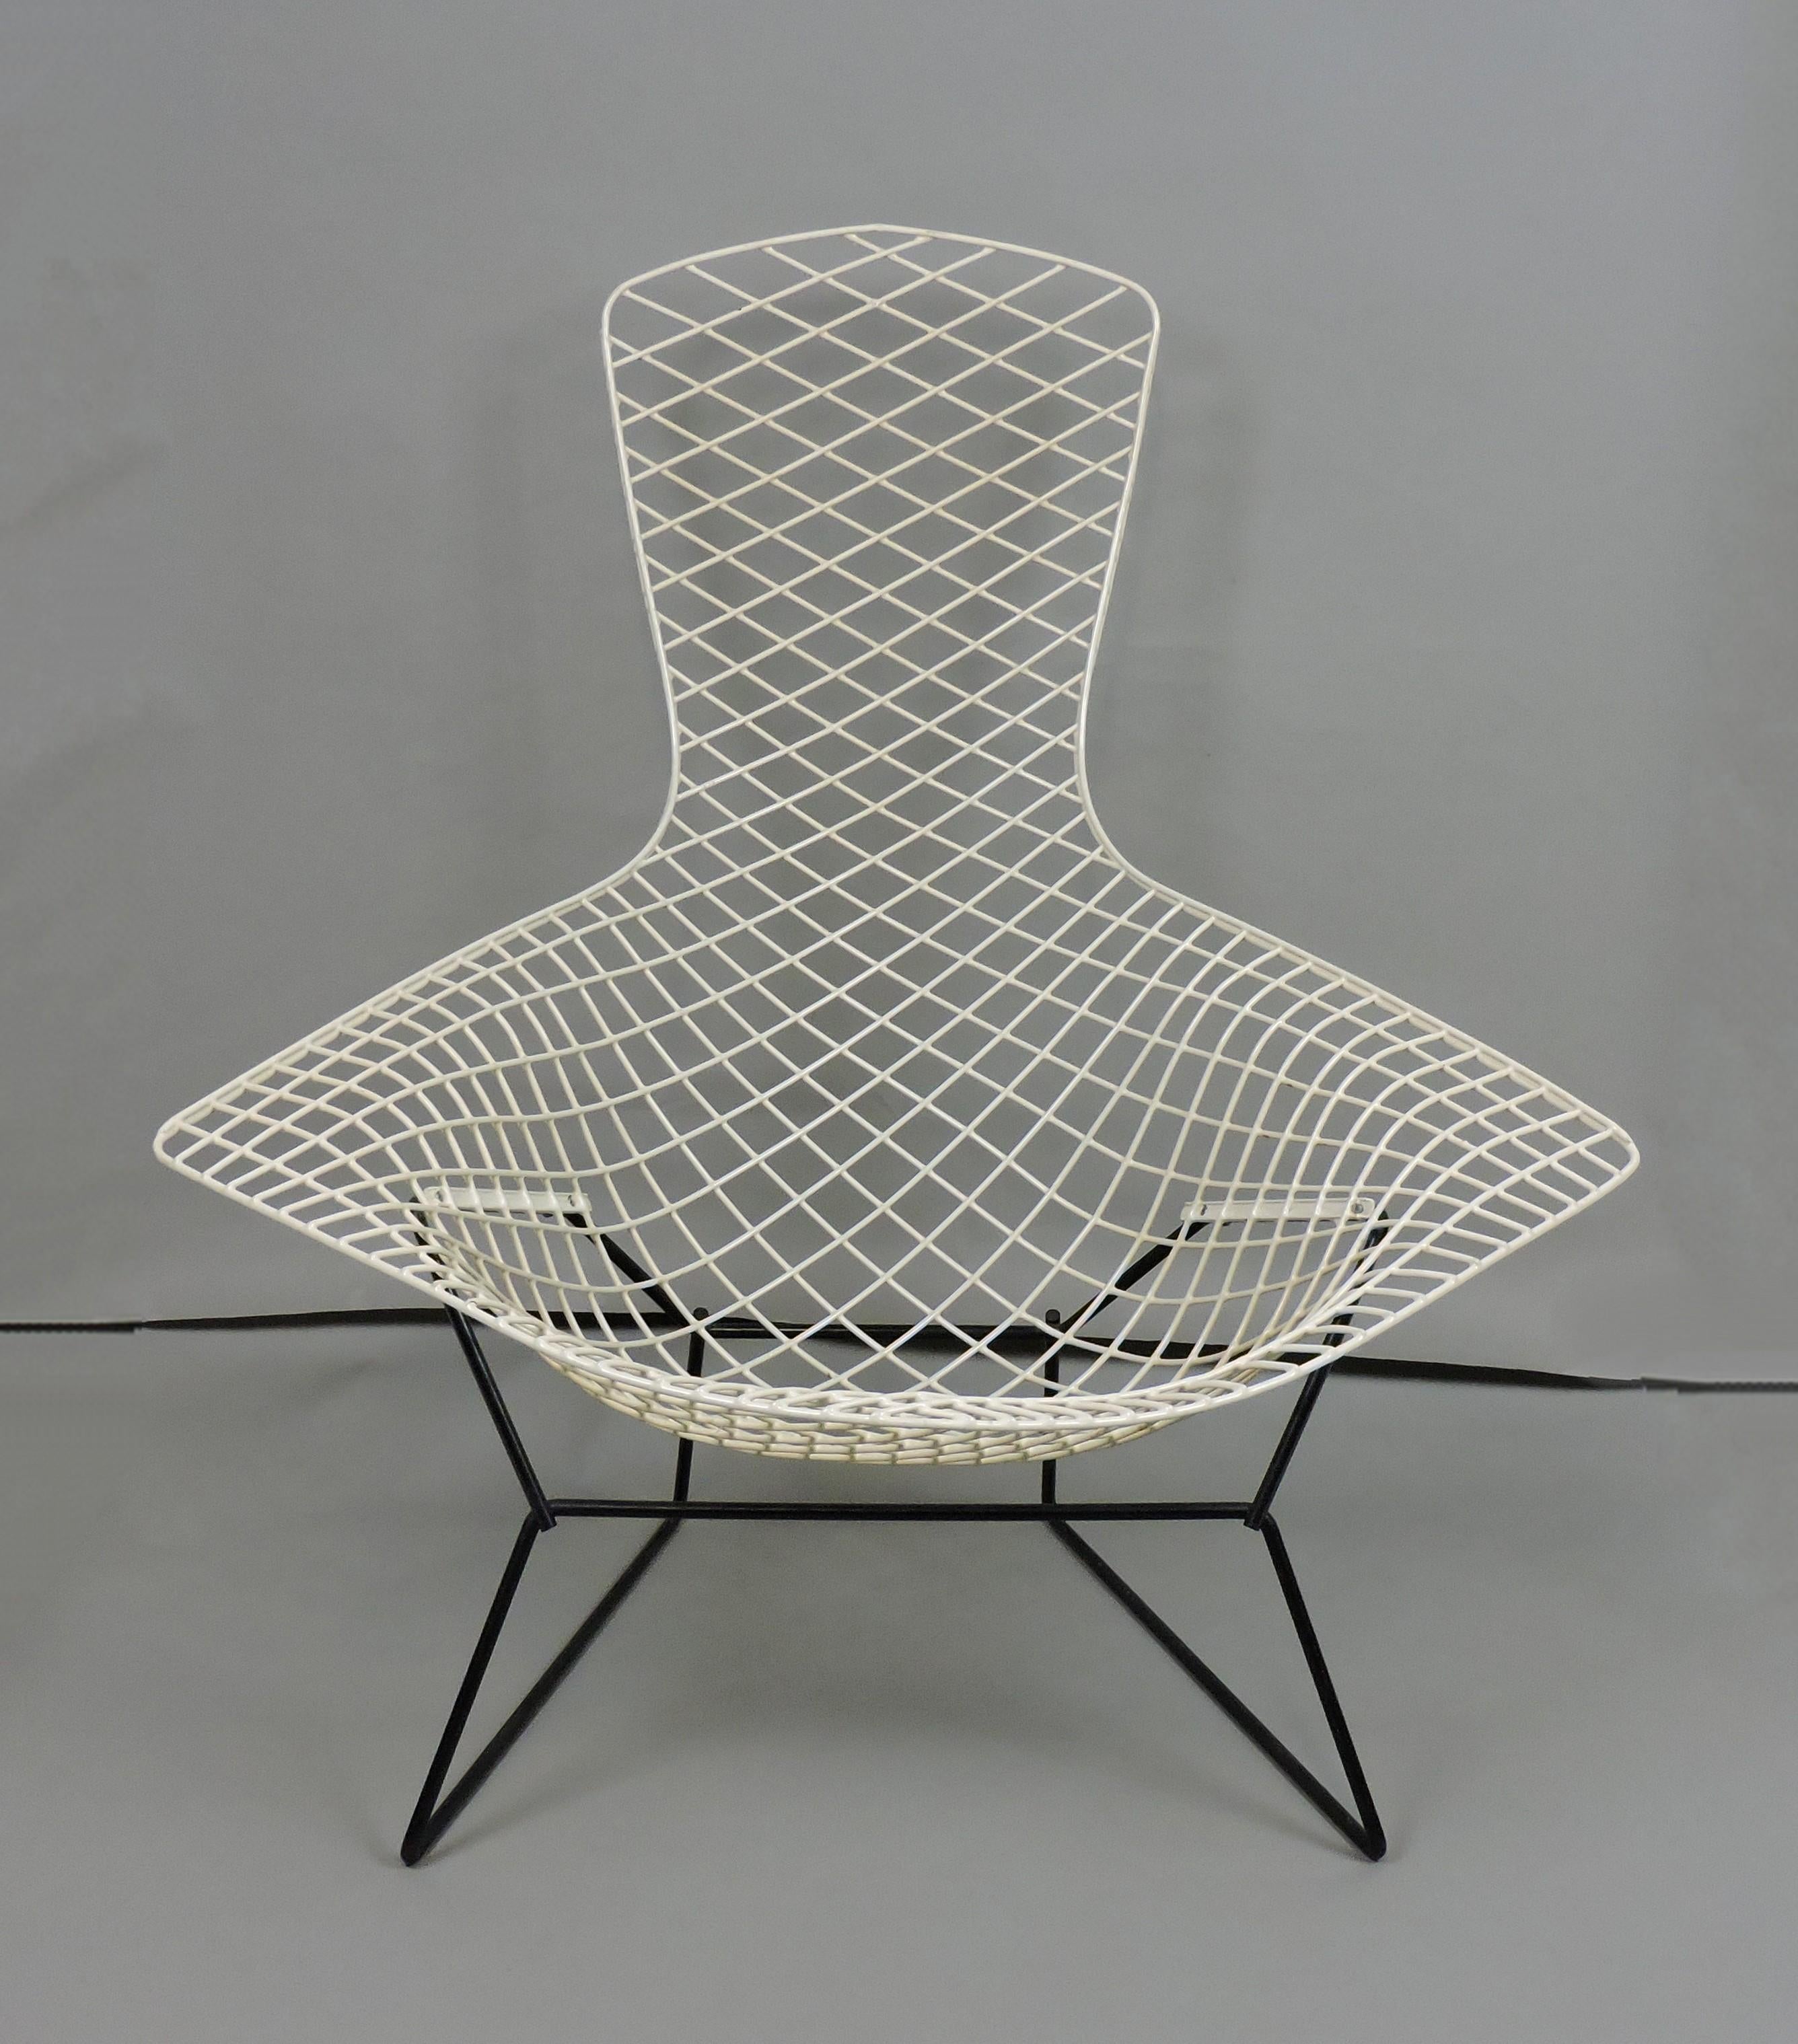 Early and unusual classic wire bird chair designed by Harry Bertoia and manufactured by Knoll. This chair dates to the mid 1950s, and is unusual as it was a special order and doesn't have the customary shock mounts, so there is no rocking motion.